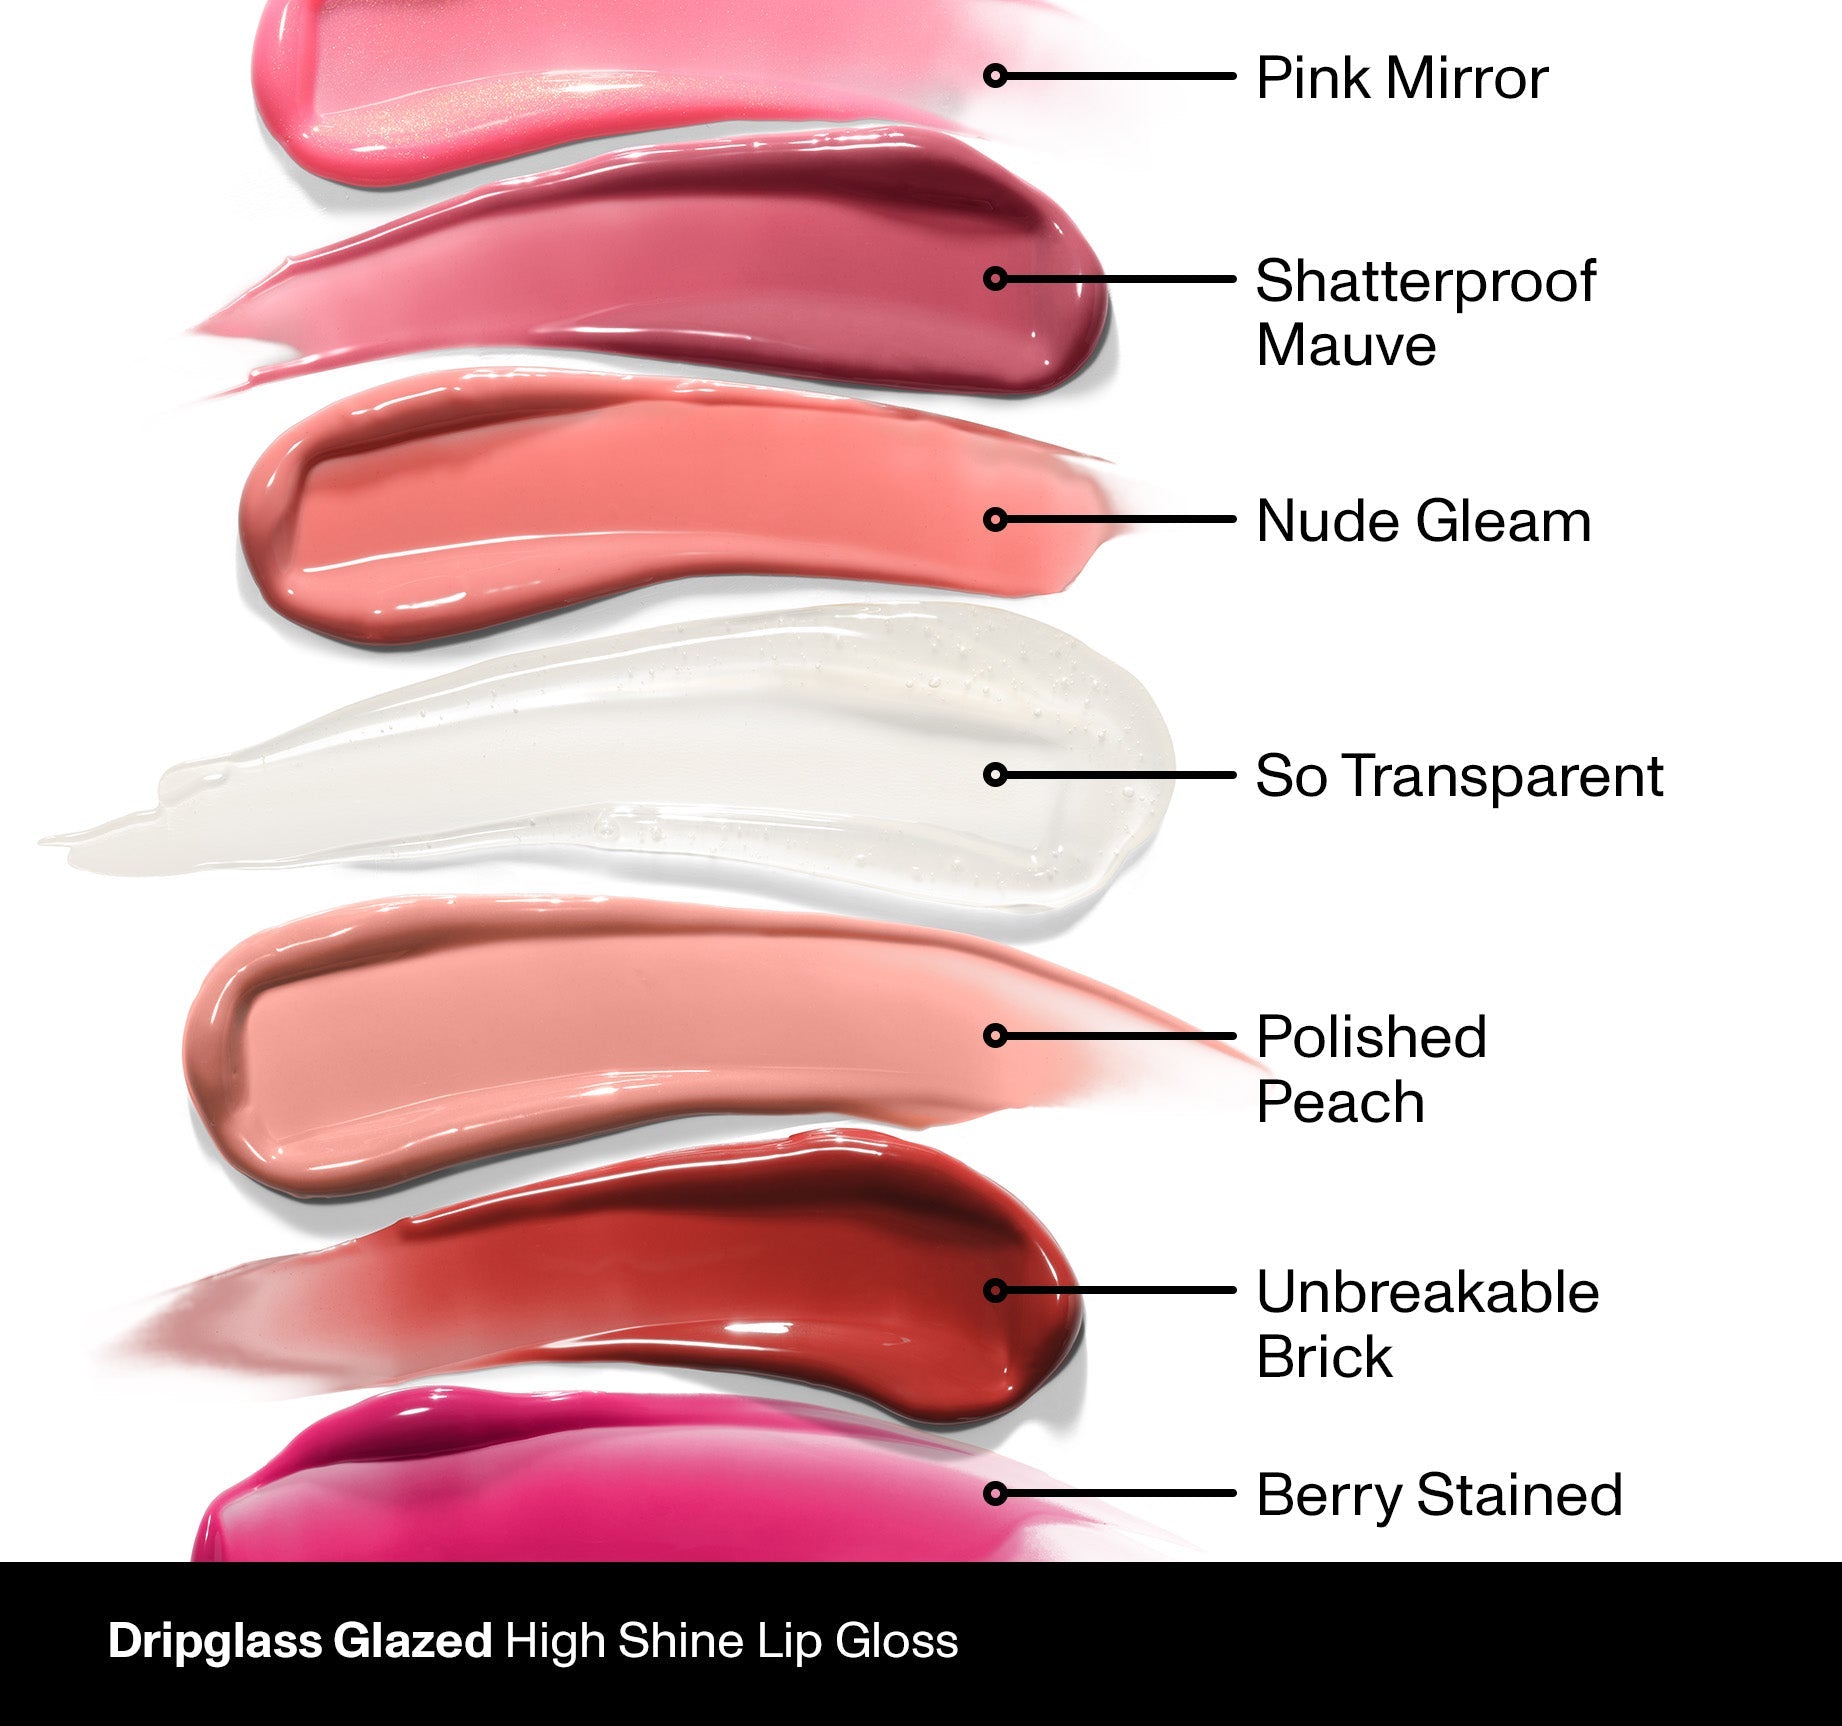 Dripglass Glazed High Shine Lip Gloss - Berry Stained - Image 9